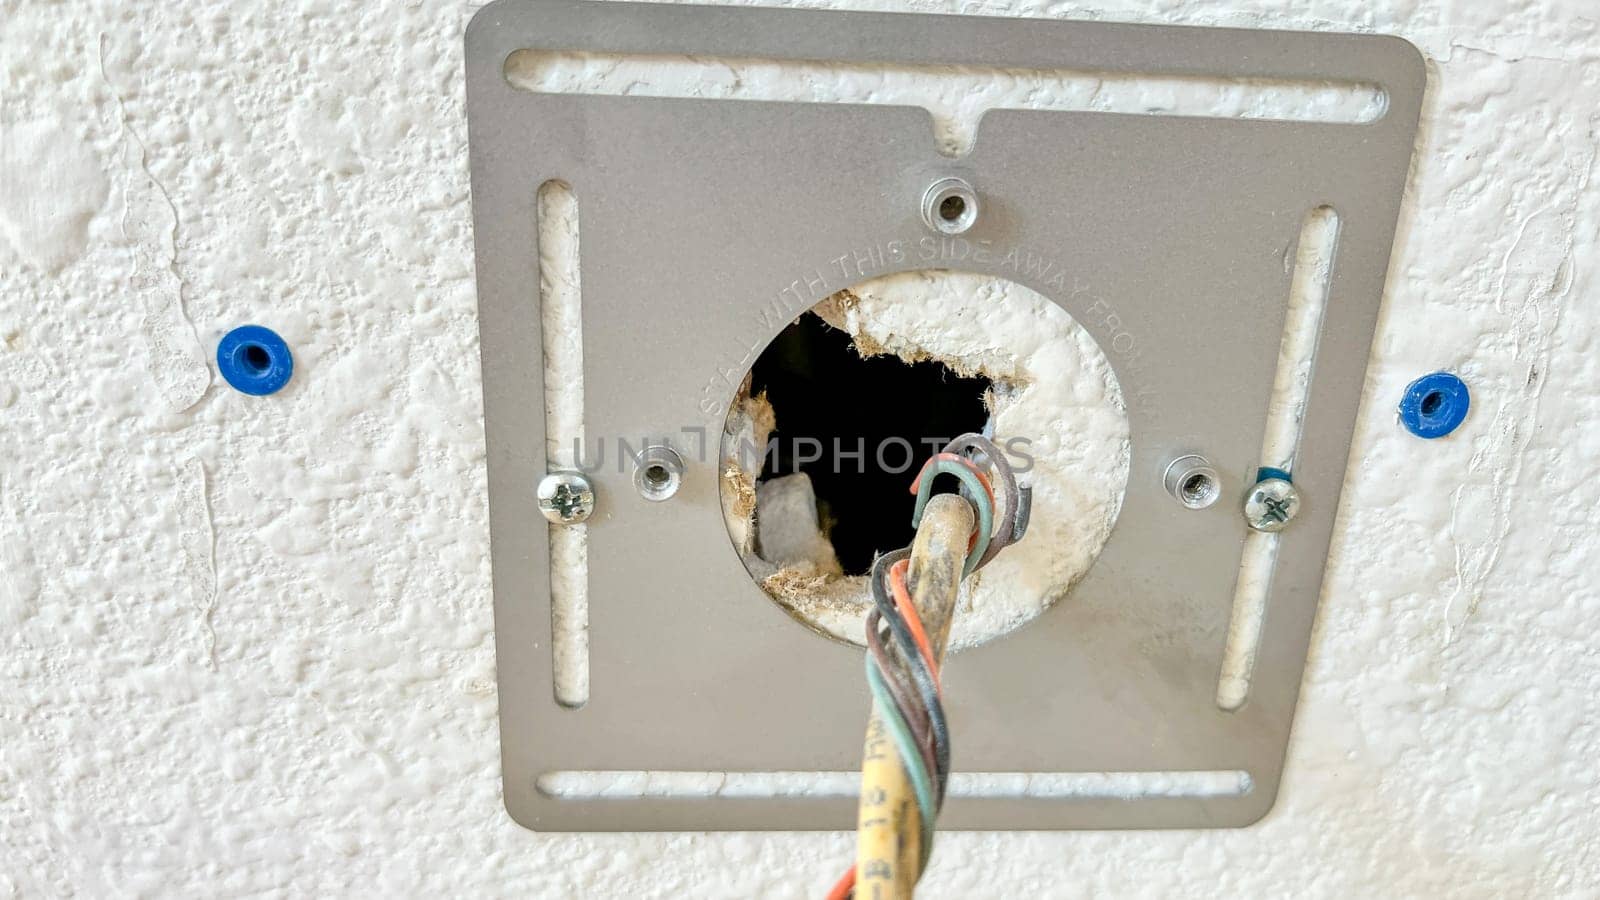 Close-up image of electrical wiring being installed through a wall plate. The exposed wires and mounting hardware are visible against the textured wall.